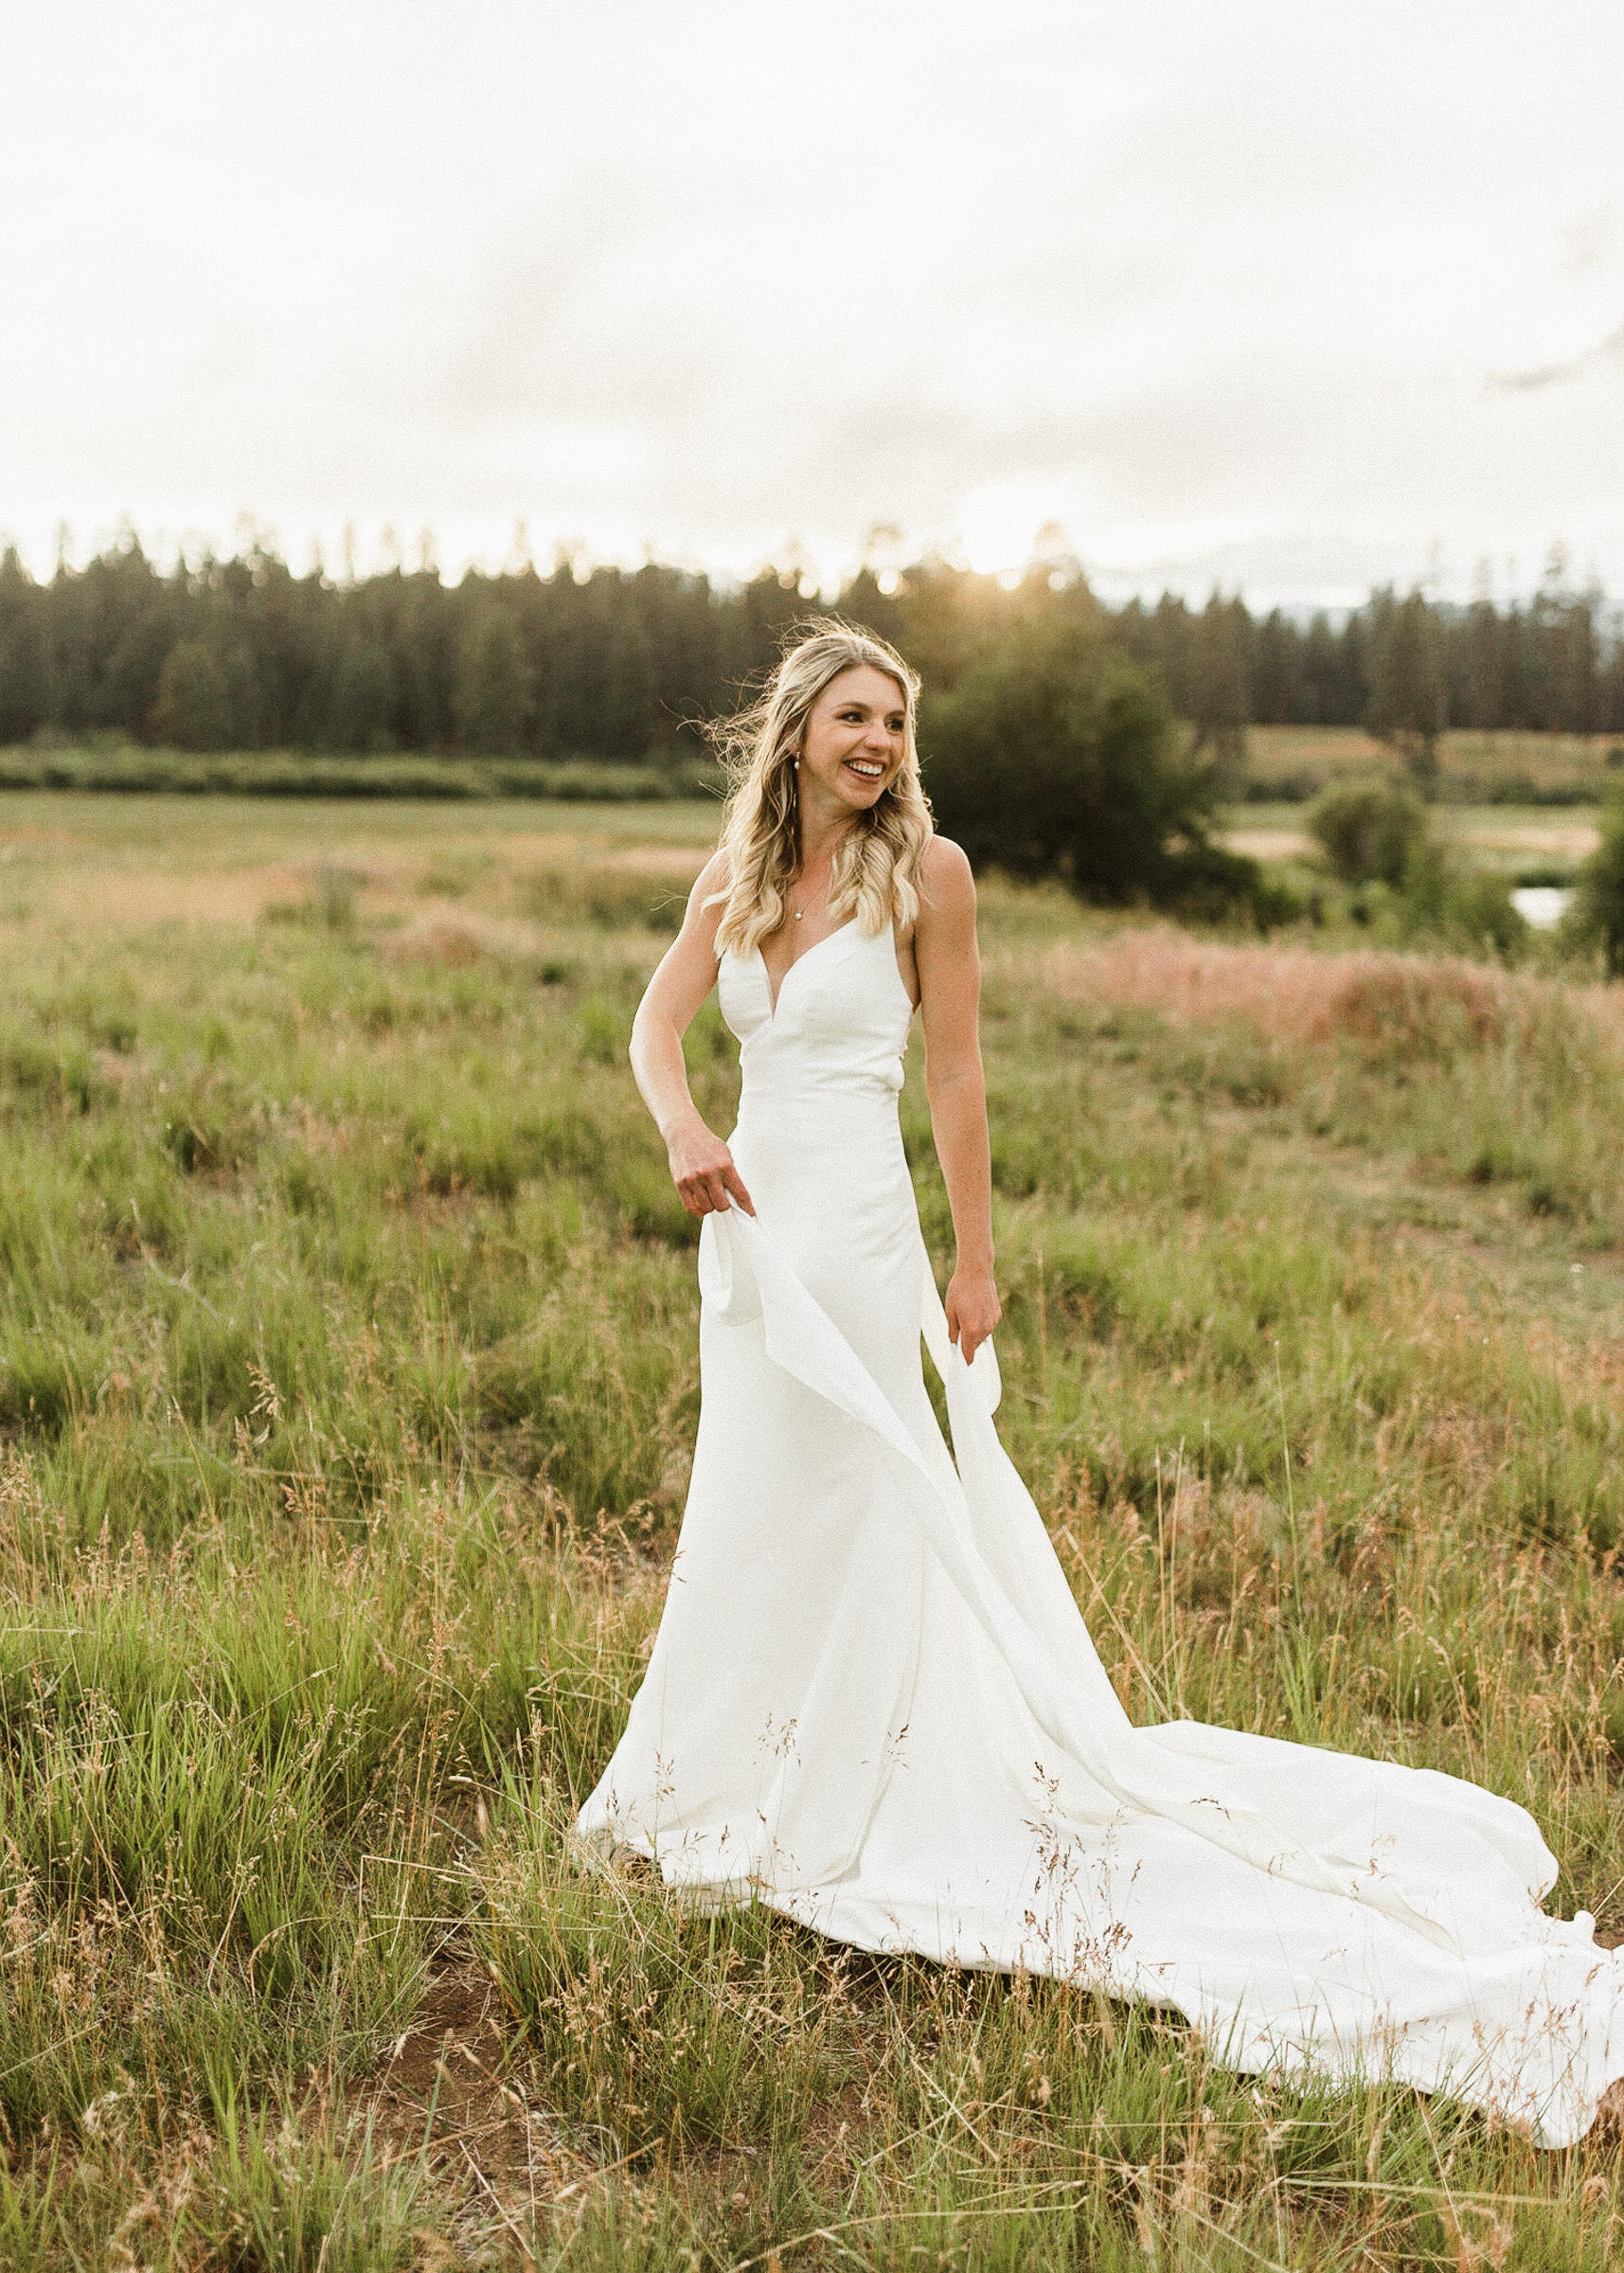 Bride poses for a portrait in a field